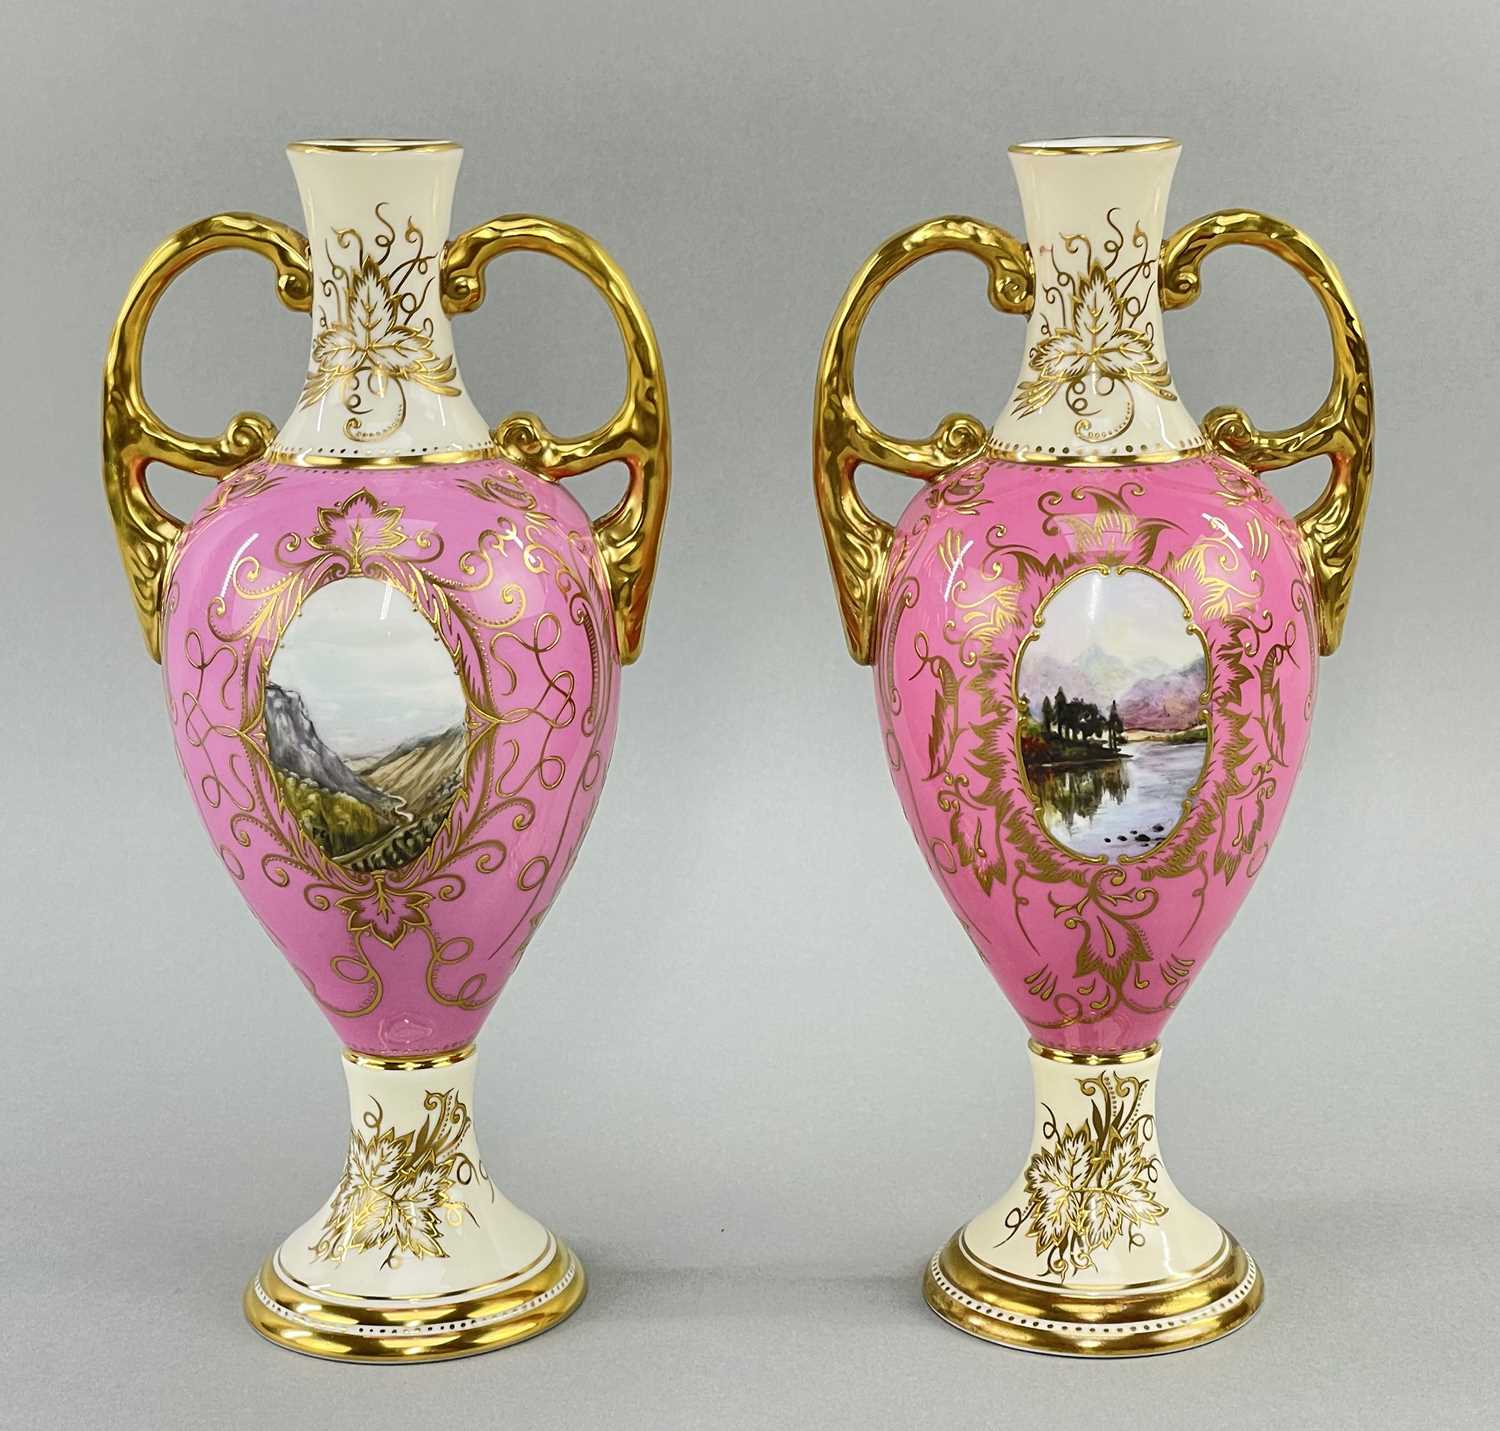 MATCHED PAIR COALPORT TWIN HANDLES VASES, each painted with two oval vignettes of Highland